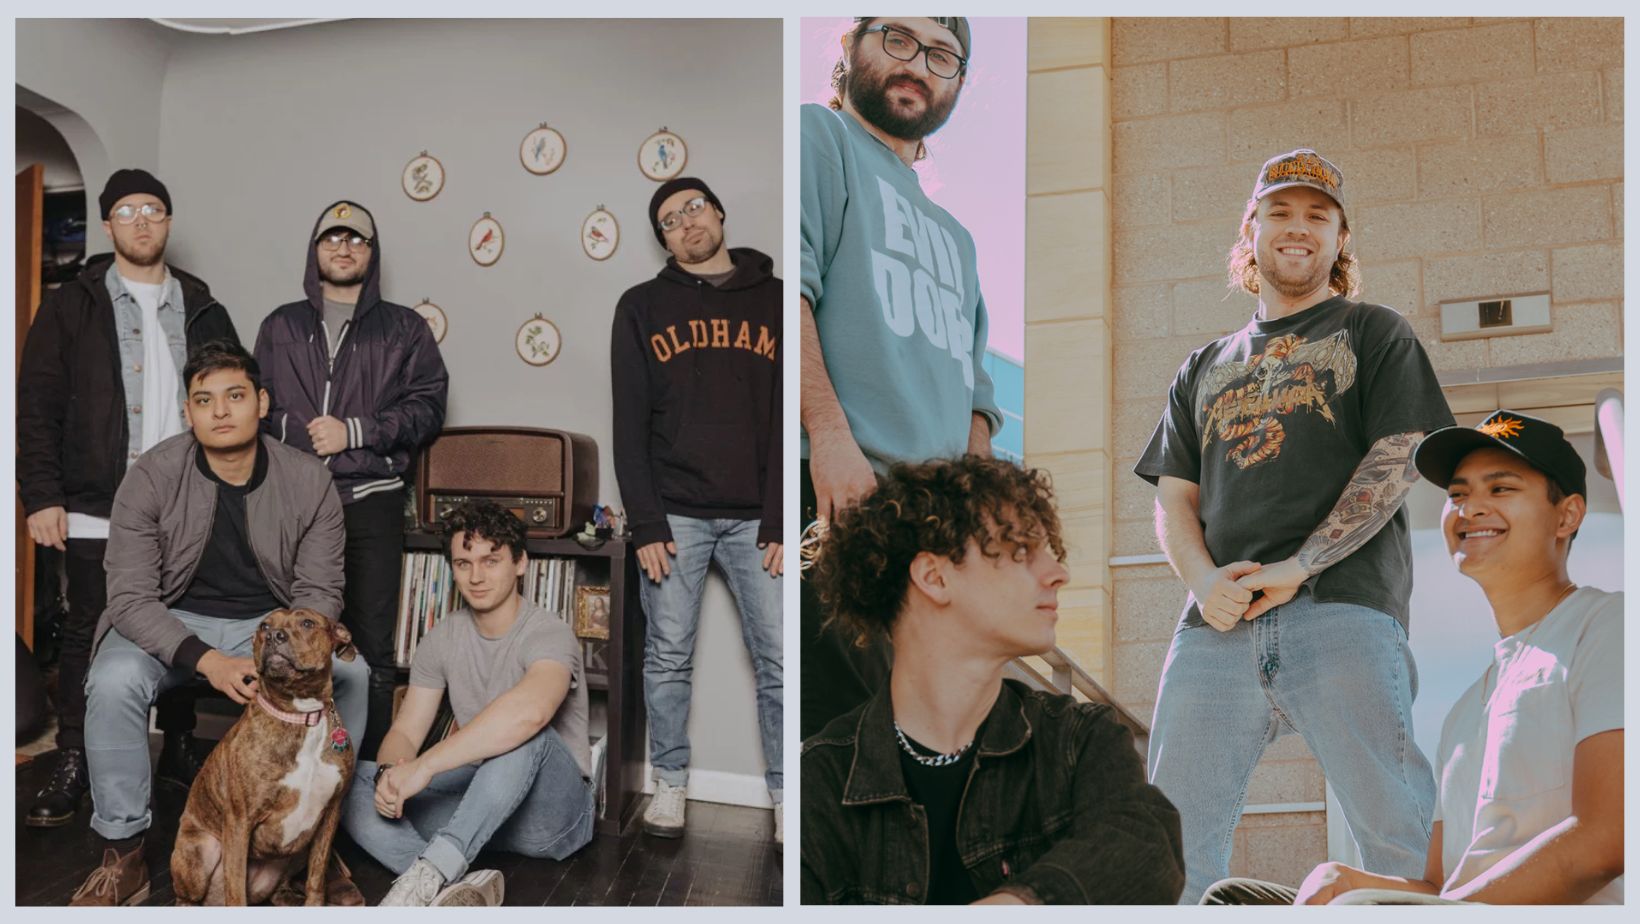 What Is Hot Mulligan Allegations And Online Drama About?